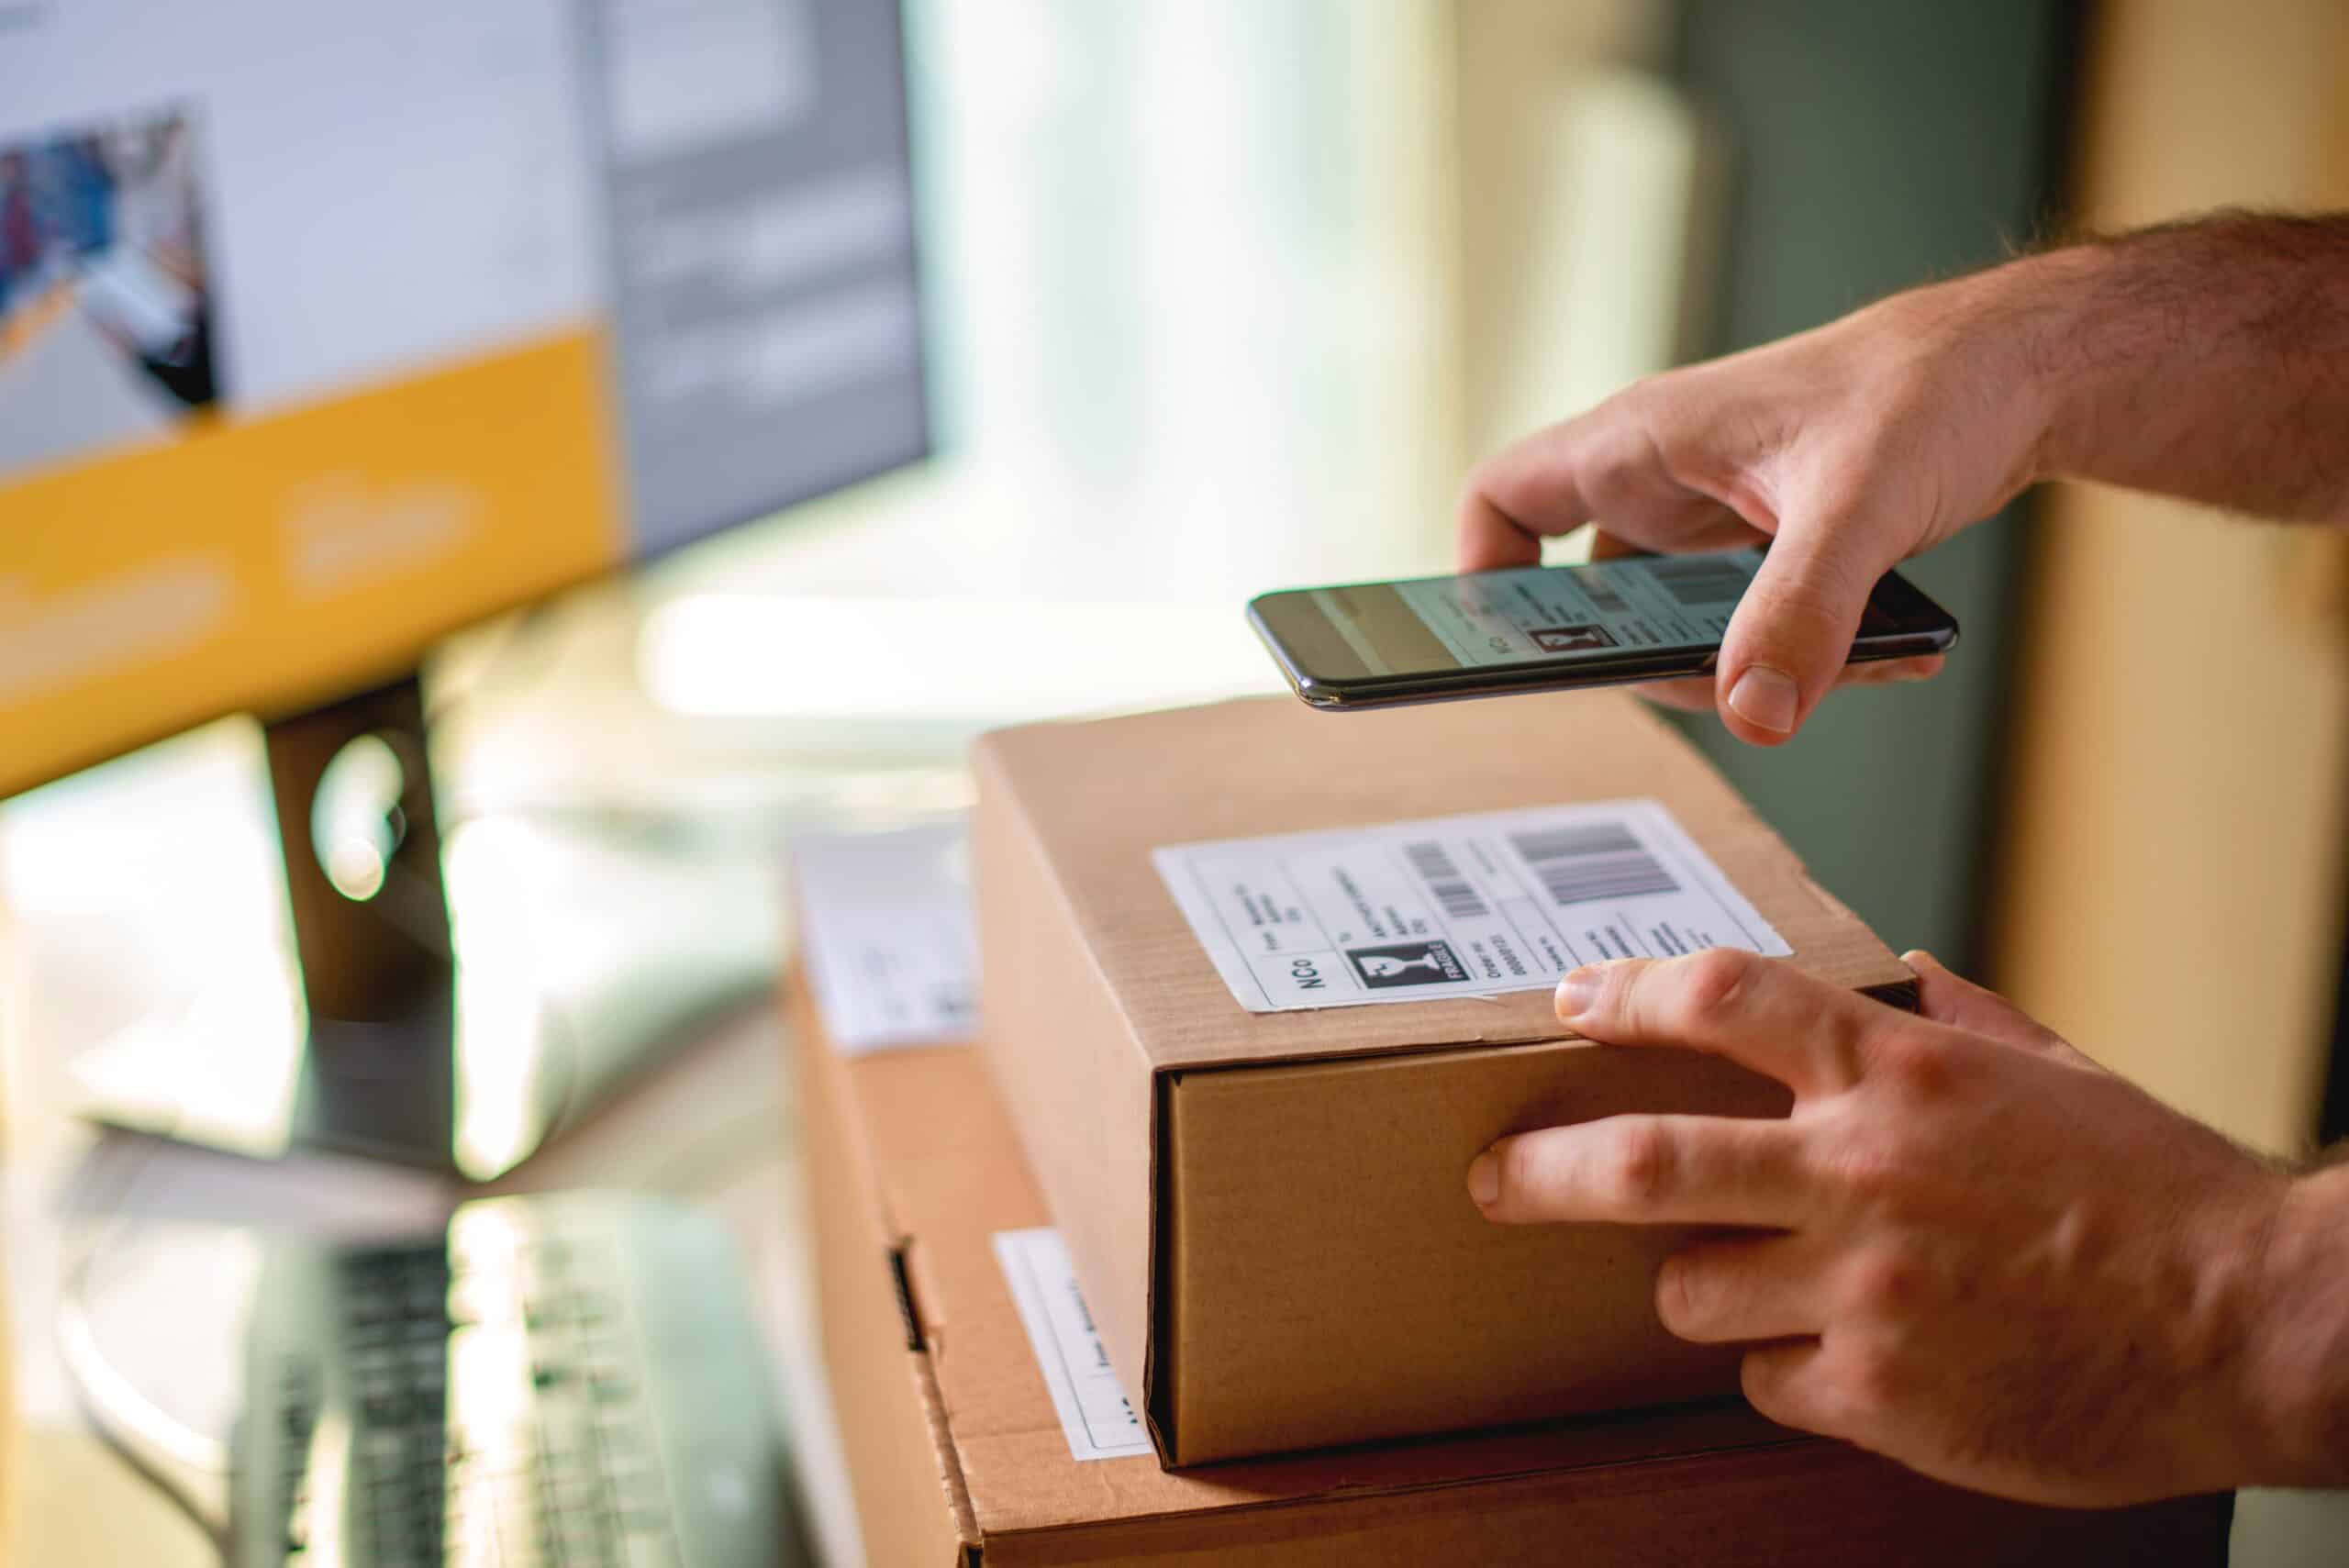 15 Stats About 's Super Fast Shipping and Delivery Service